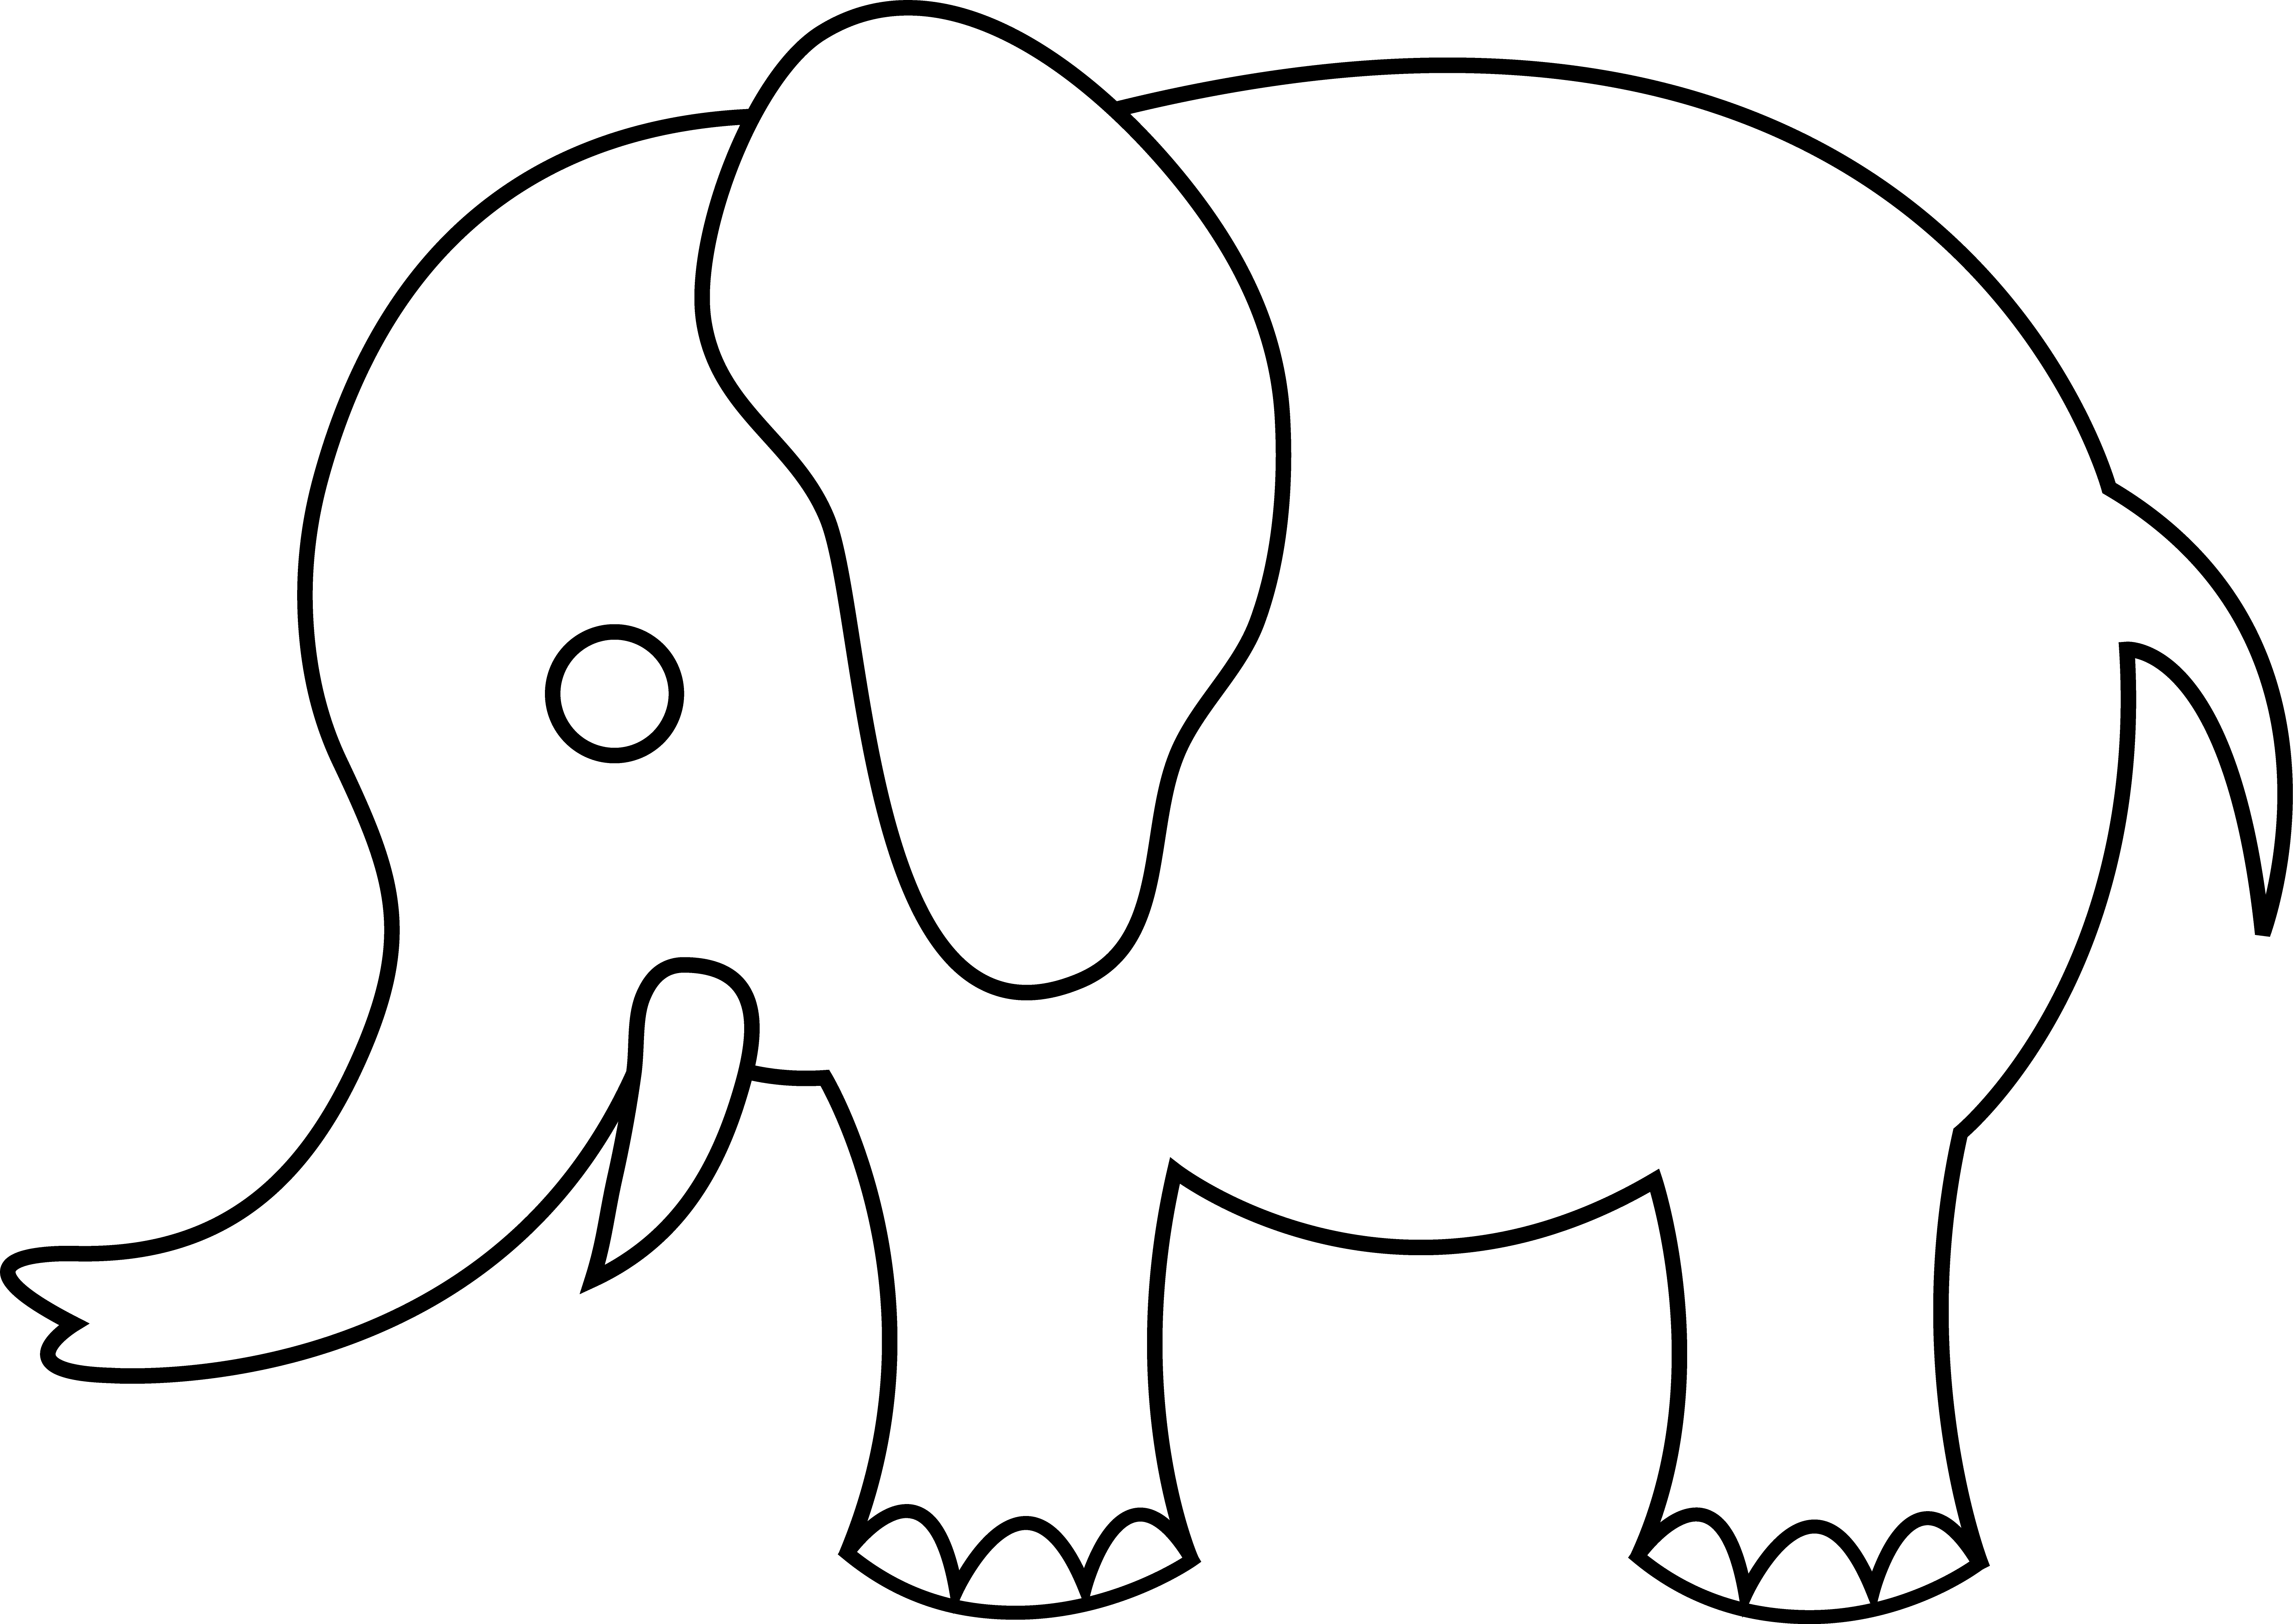 Free Outline Of An Elephant Download Free Outline Of An Elephant png